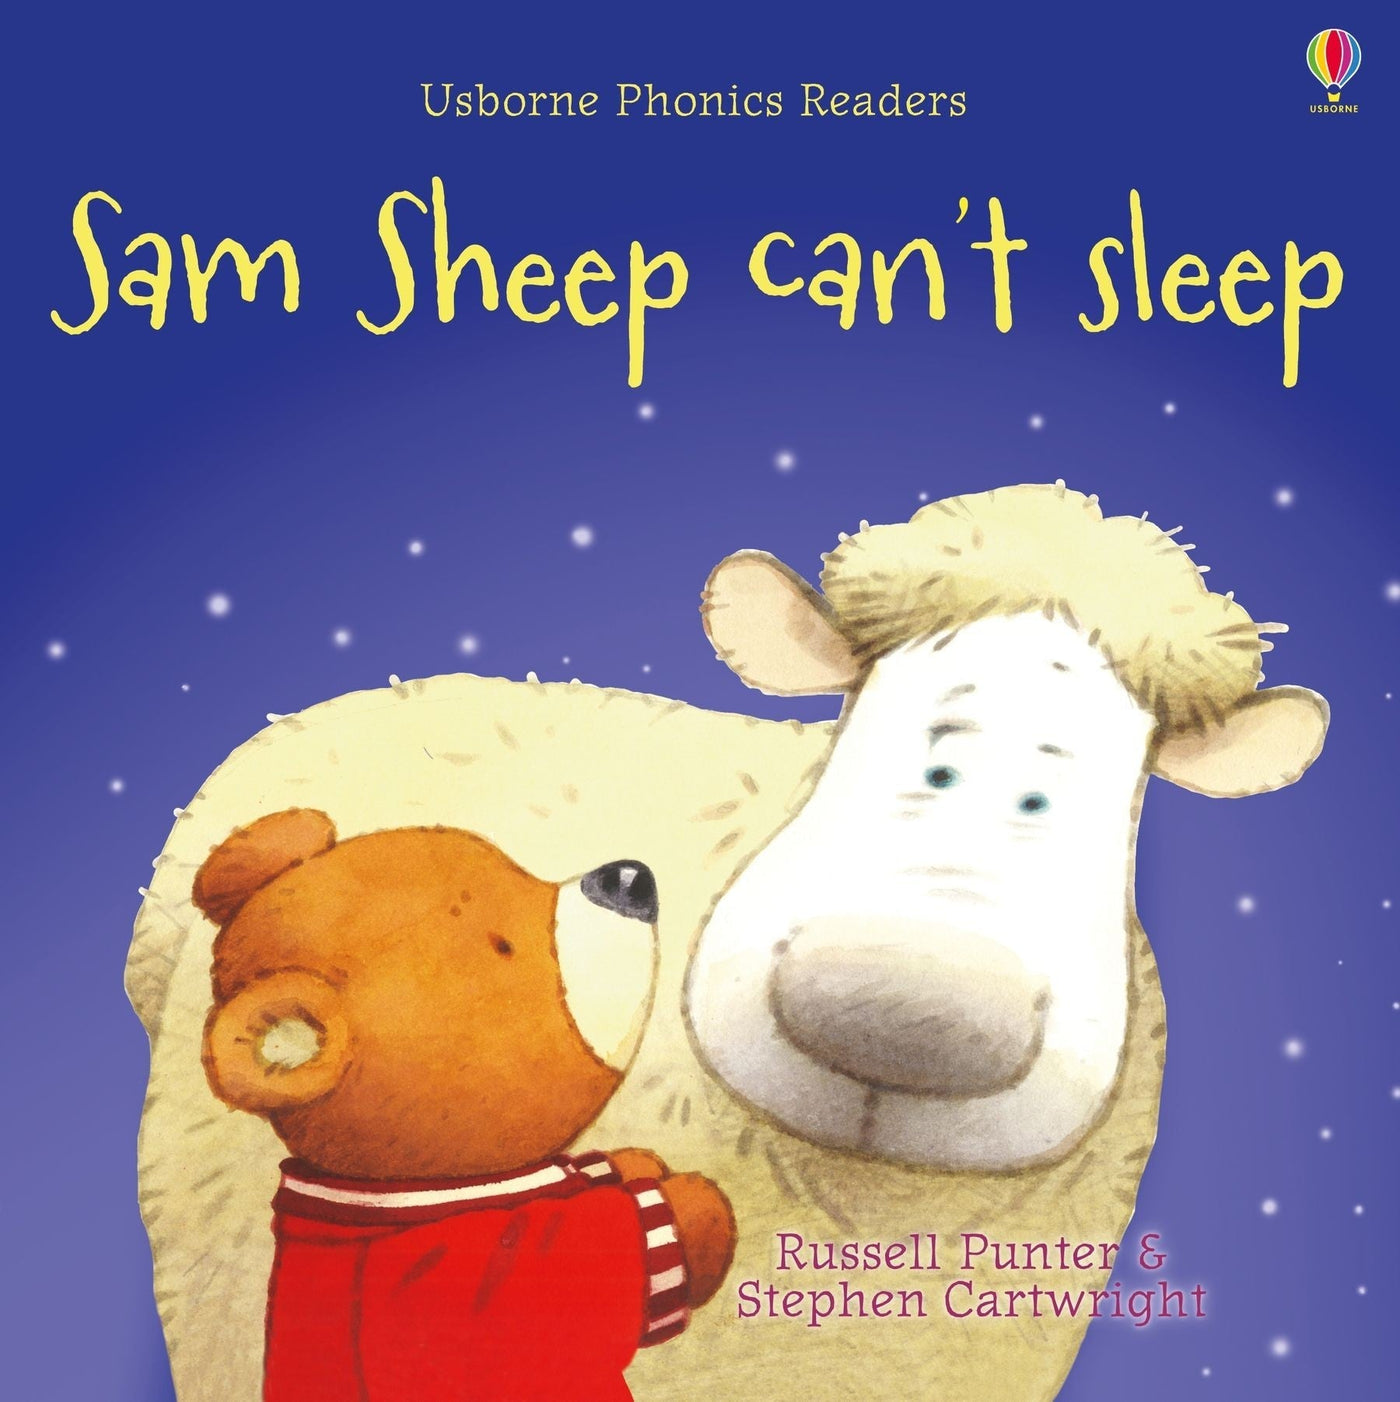 Phonic Readers: Sam Sheep Can't Sleep - Russell Punter & Stephen Cartwright